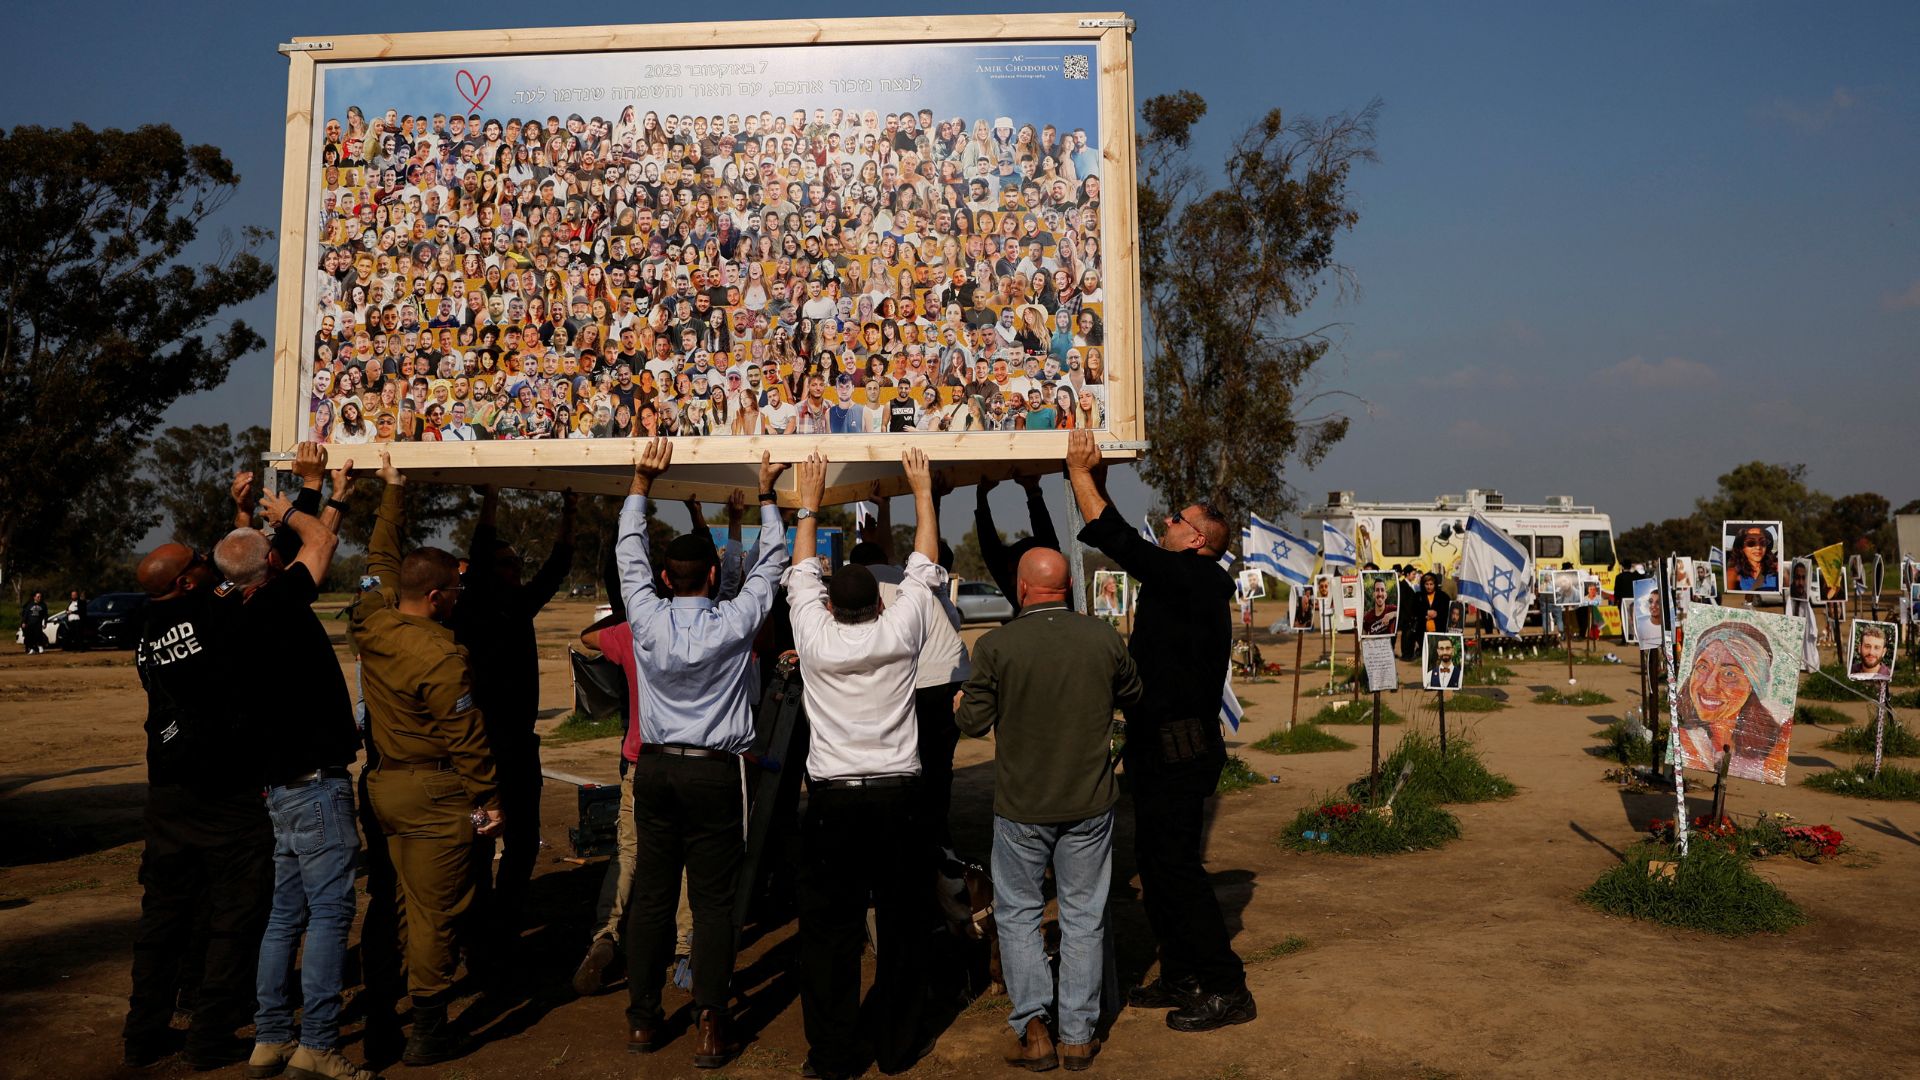 People help to raise a collage by artist Amir Chodorov depicting the faces of the Nova party victims, amid the ongoing conflict between Israel and Hamas, in Reim, southern Israel. /Susana Vera/Reuters
